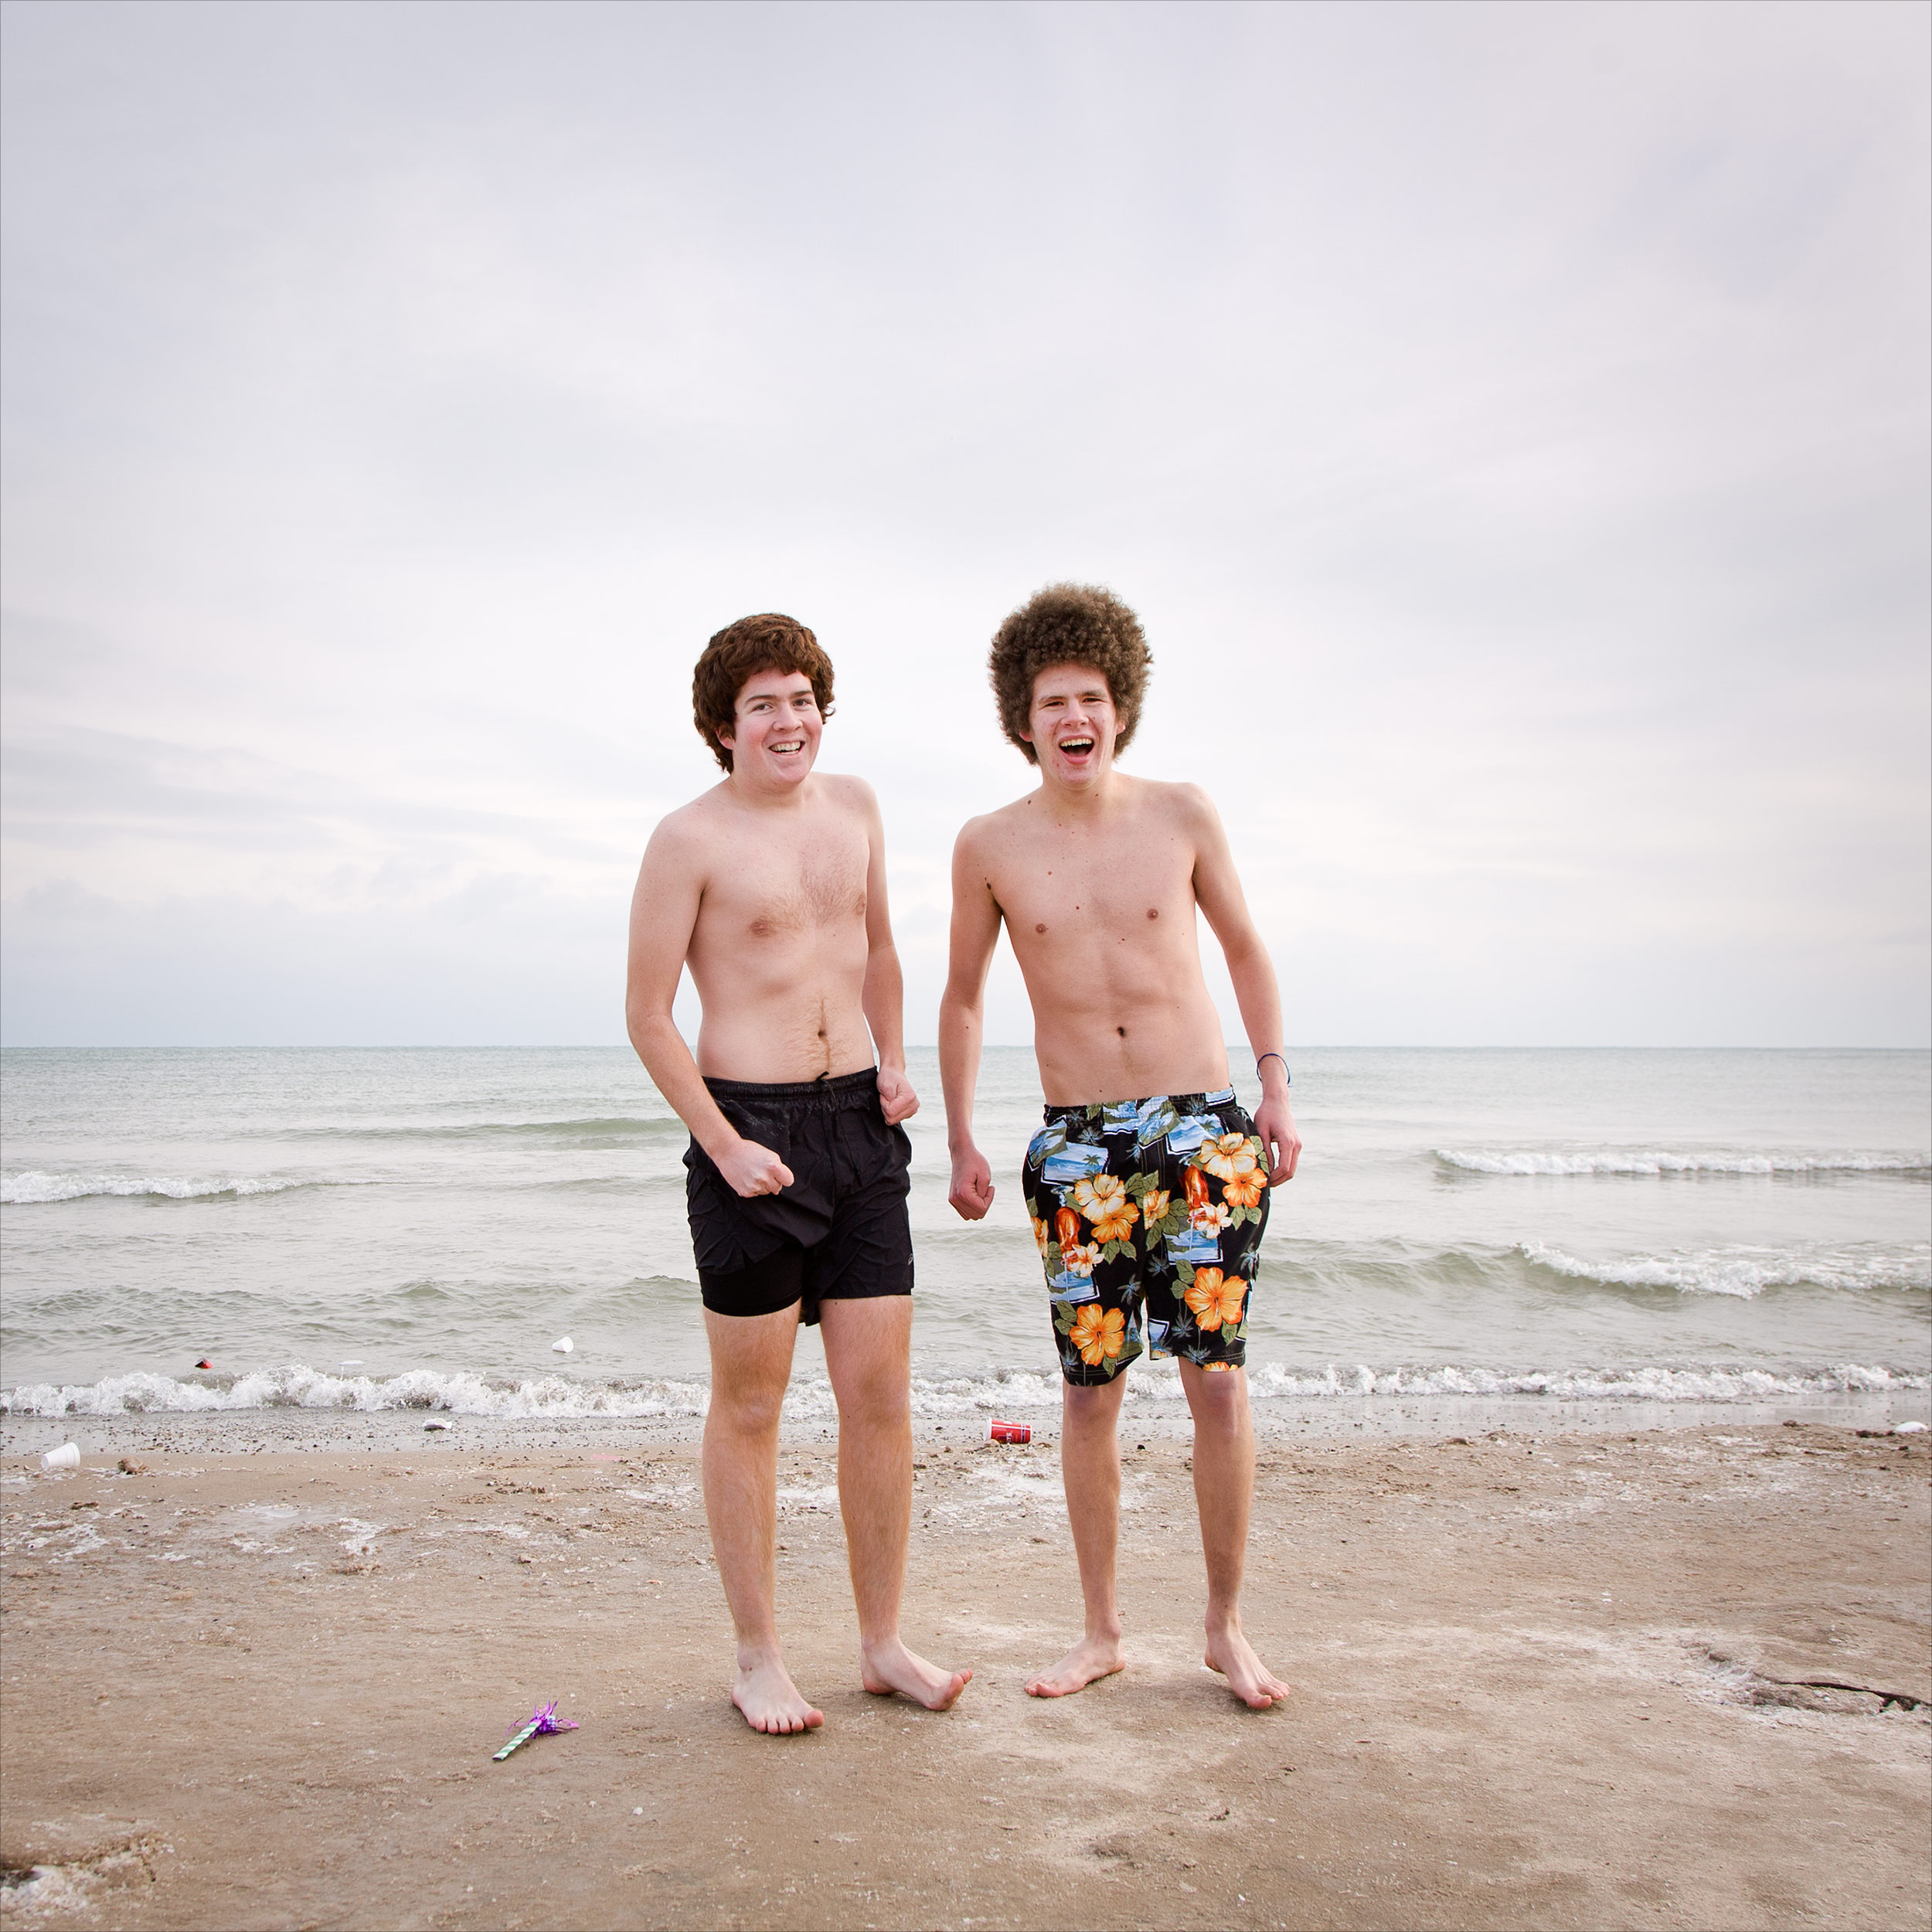 Polar Bear Plunge participants, in zero degree weather on the shore of Lake Michigan